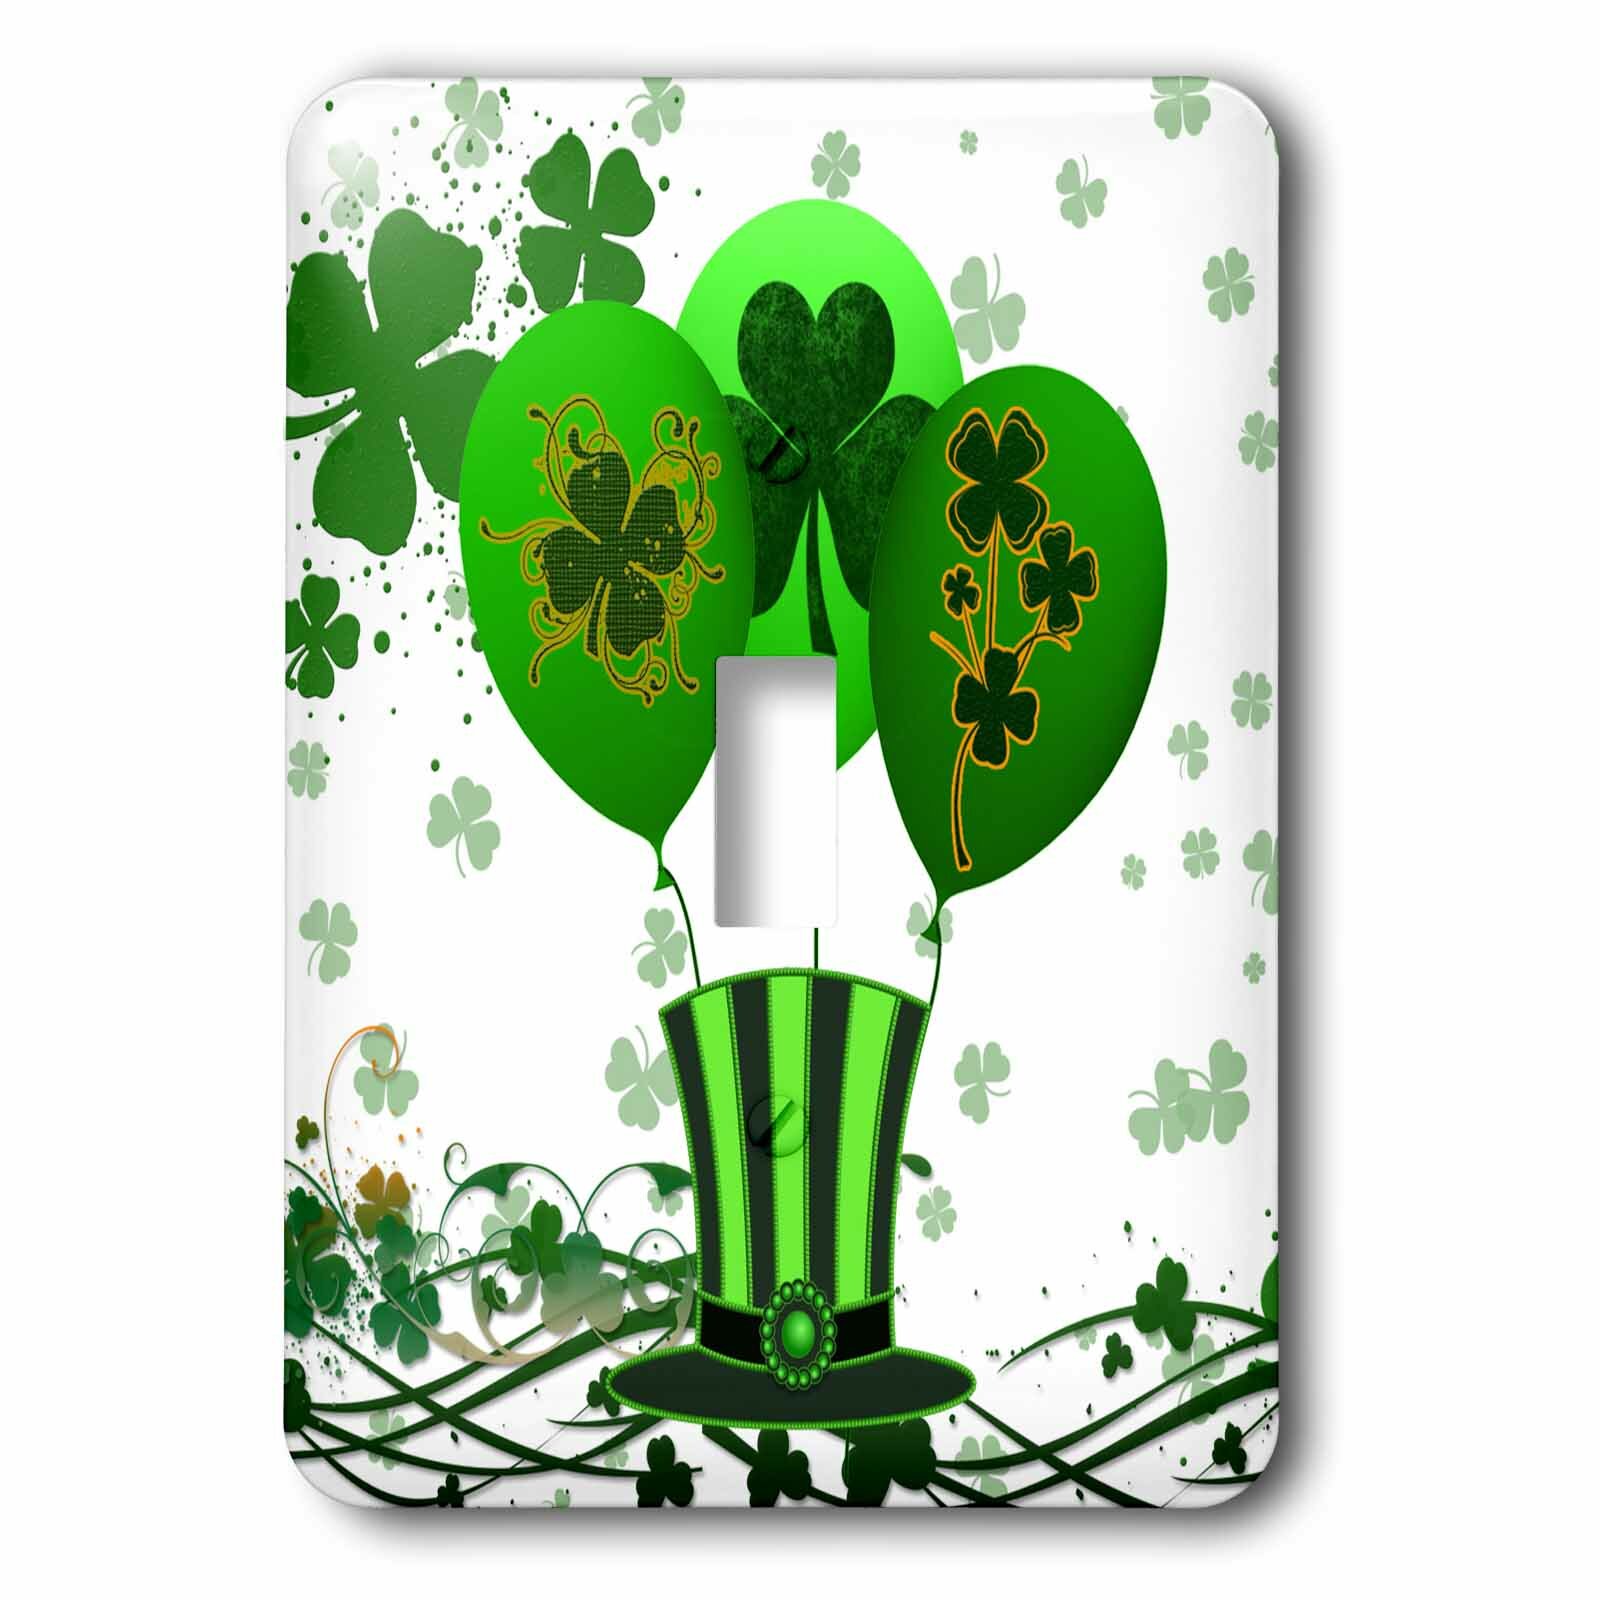 Wall Plate St Patricks Green Leprechaun With Clover Switch Plate Light Switch Cover Decorative Outlet Cover for Living Room Bedroom Kitchen 